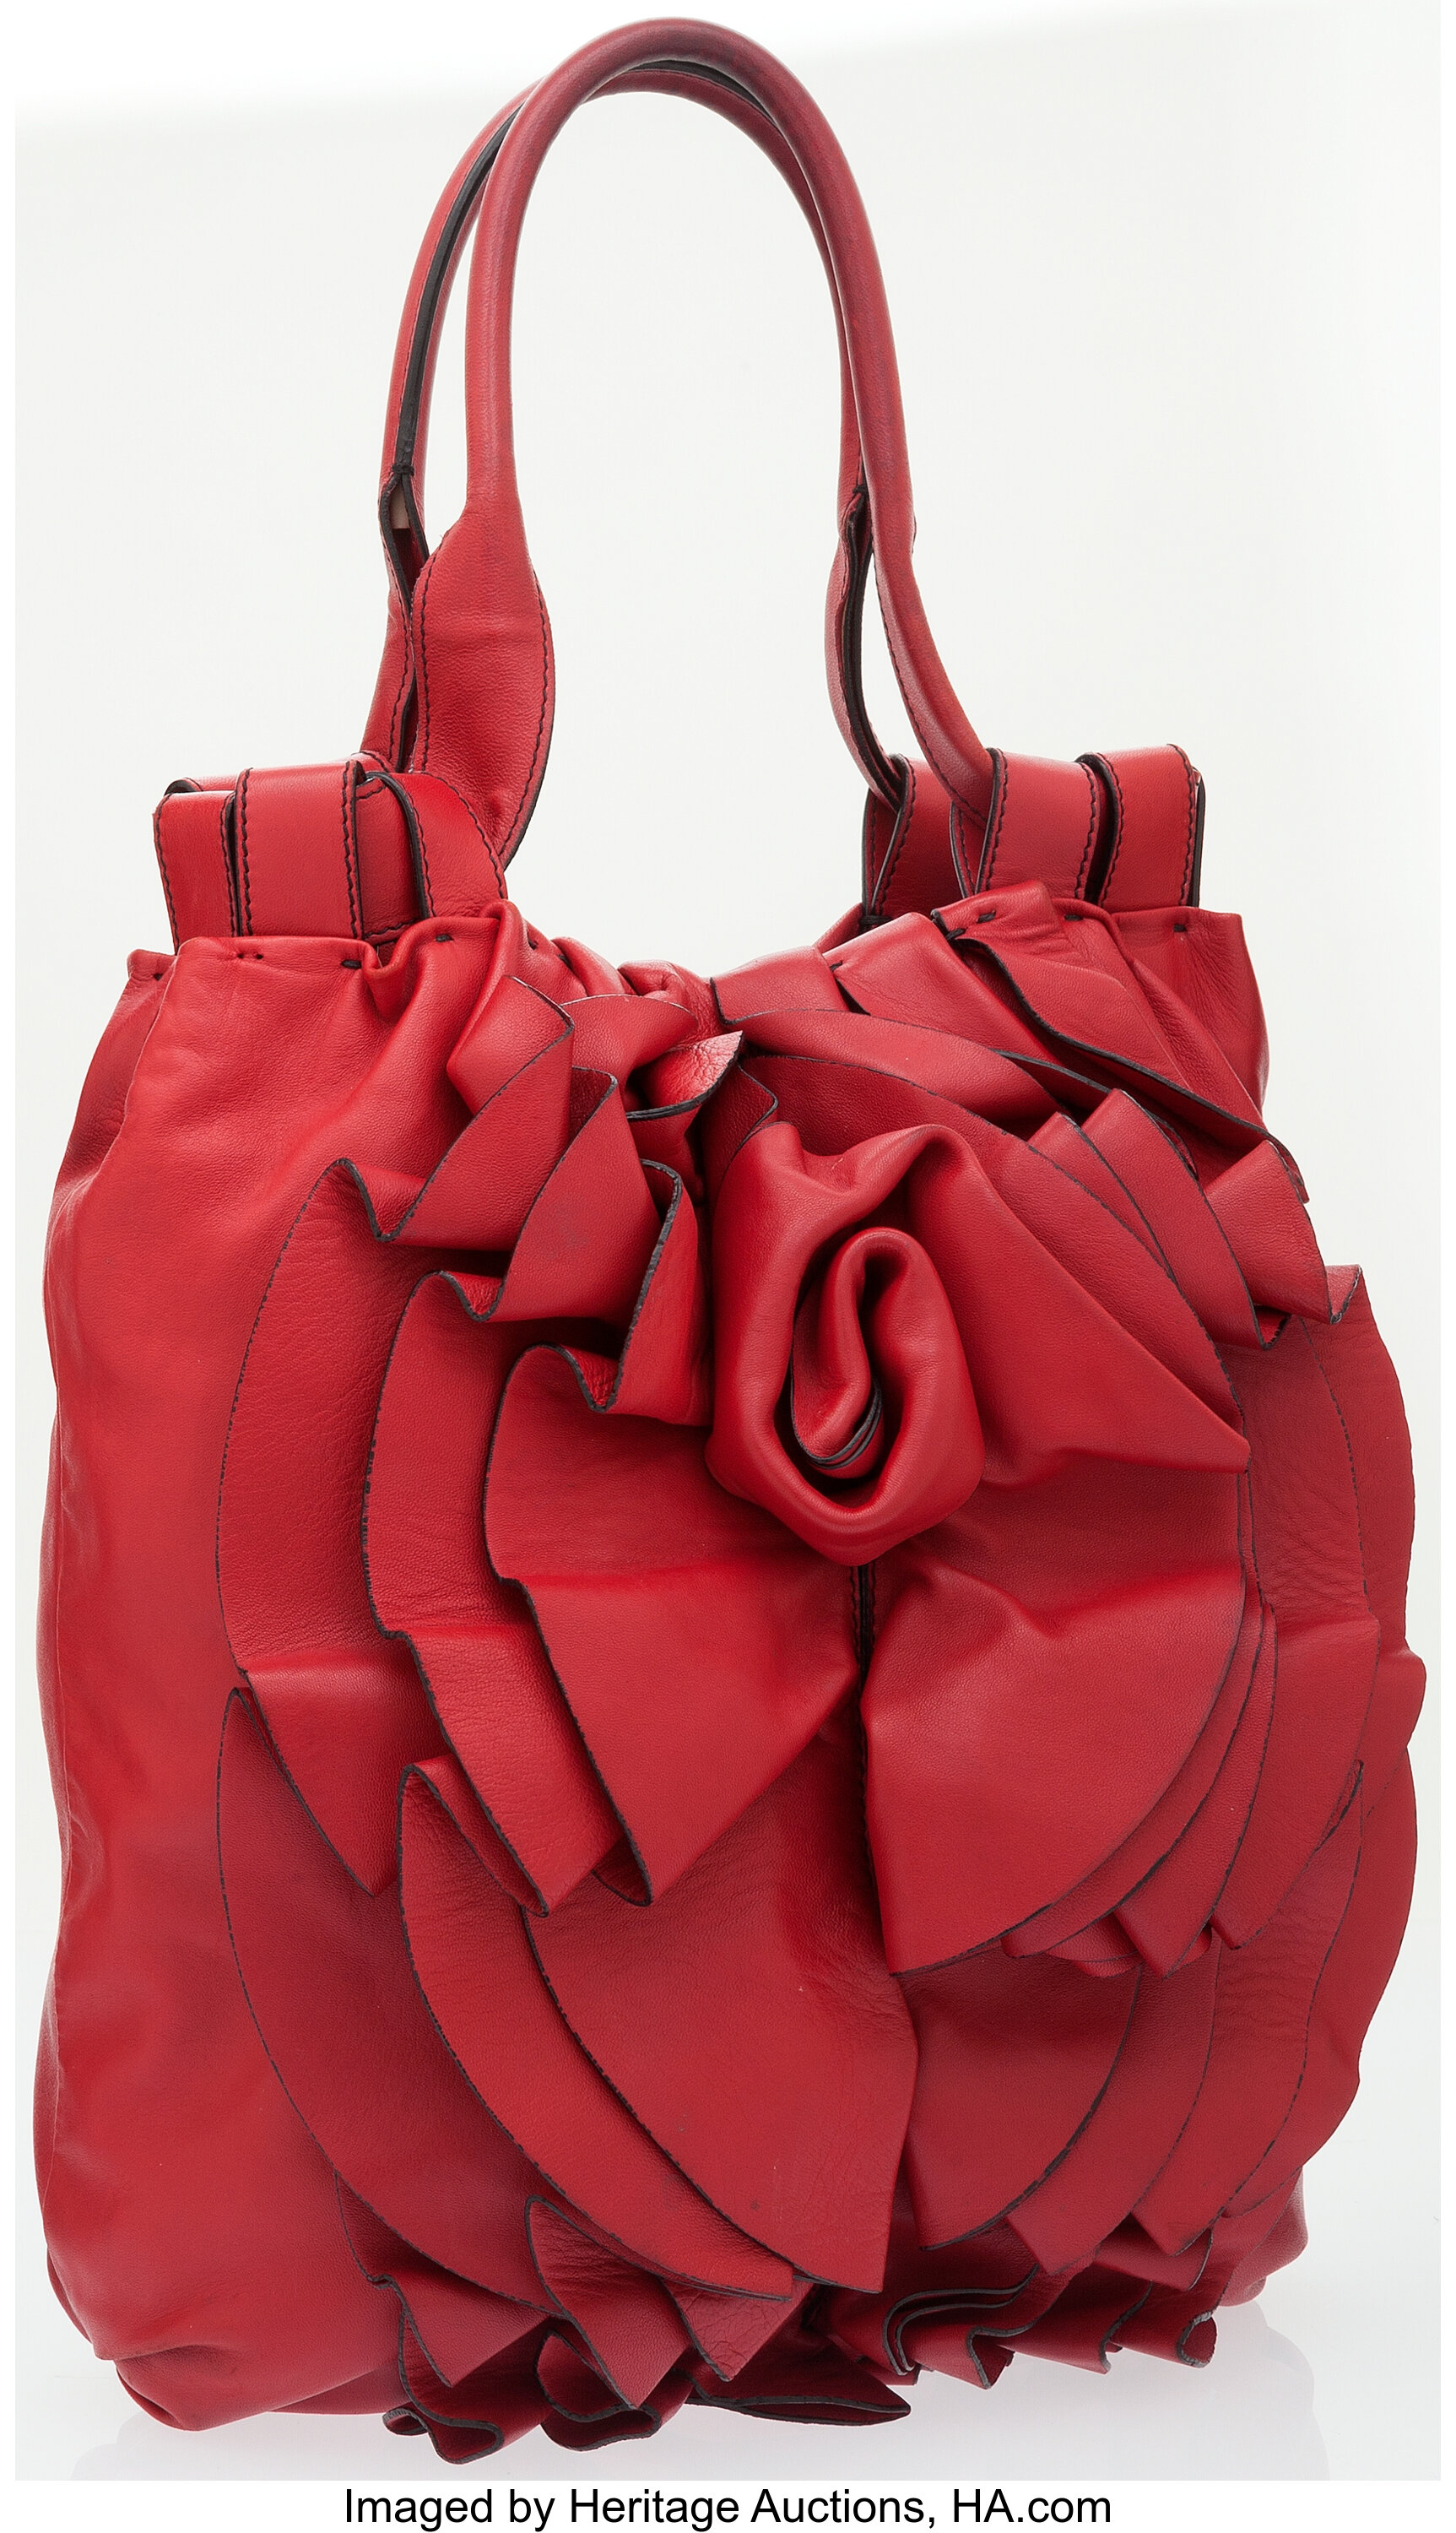 Valentino, Bags, Valentino Red Rose Beauty